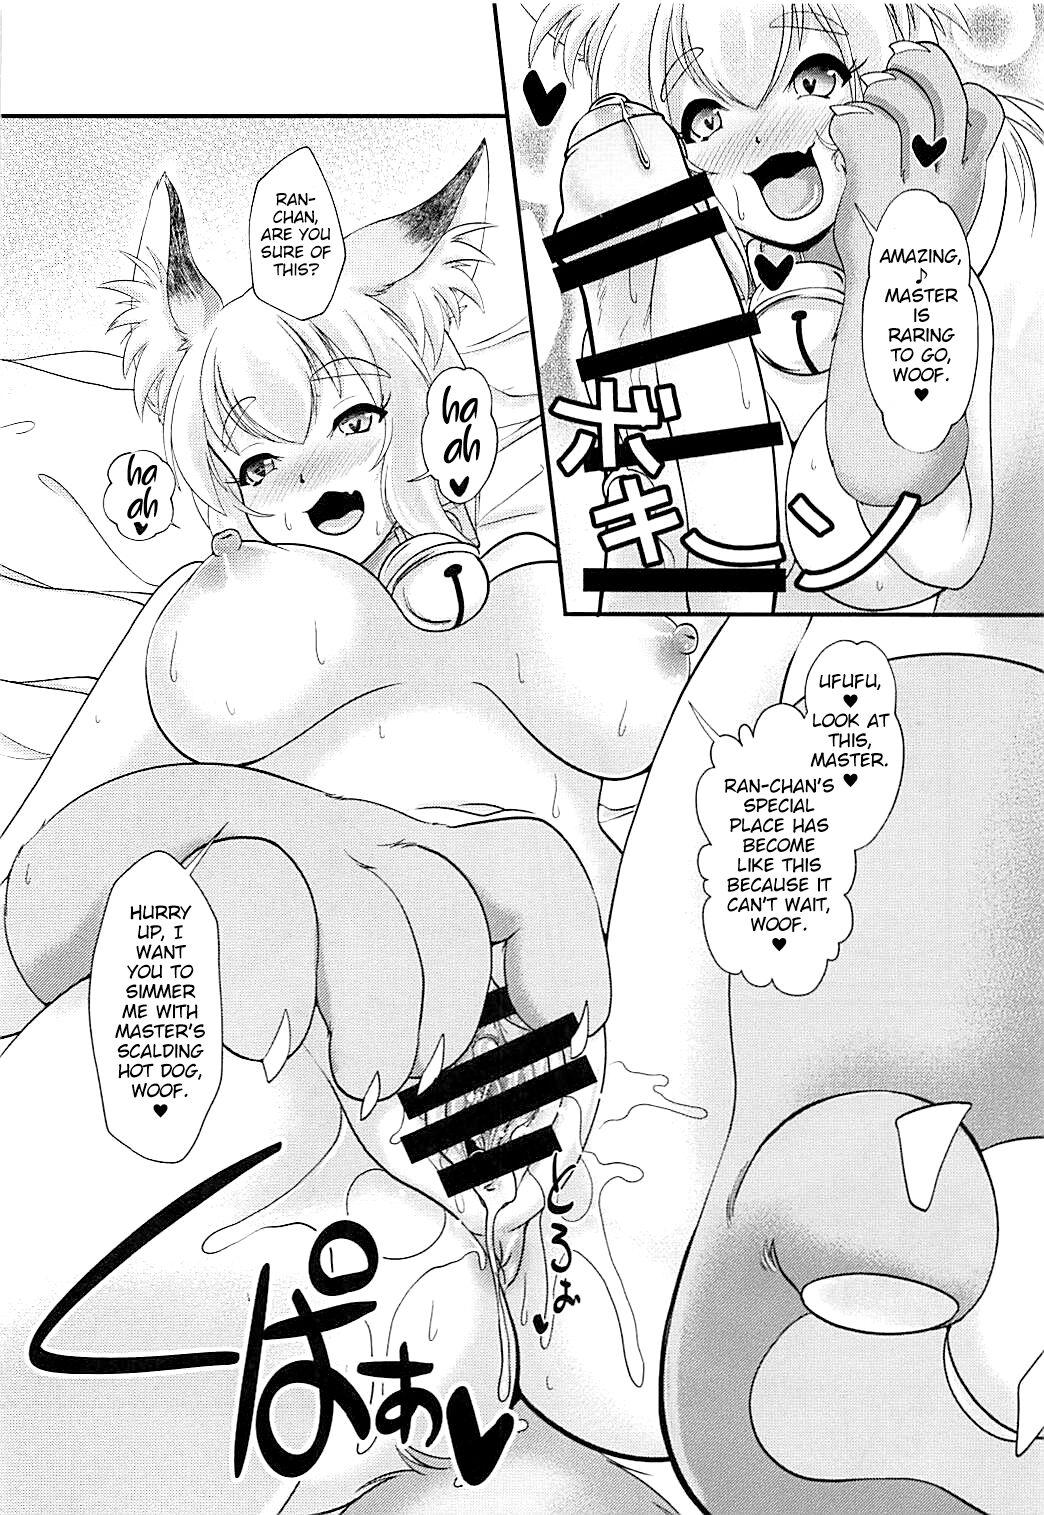 Colombian Rental Fox - Touhou project Babe - Page 7